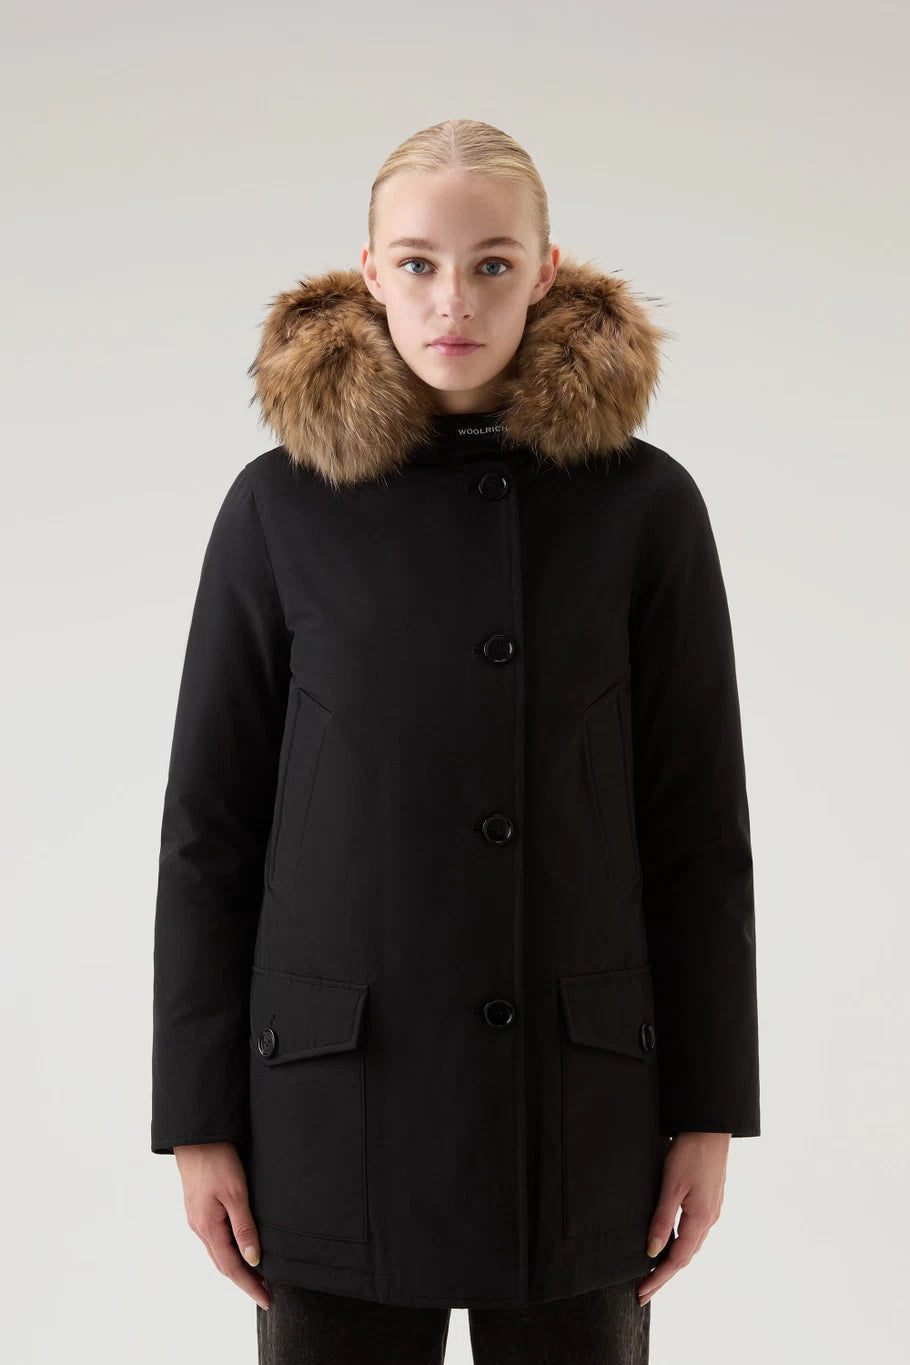 Black Arctic Parka in Ramar Cloth with Four Pockets and Detachable Fur